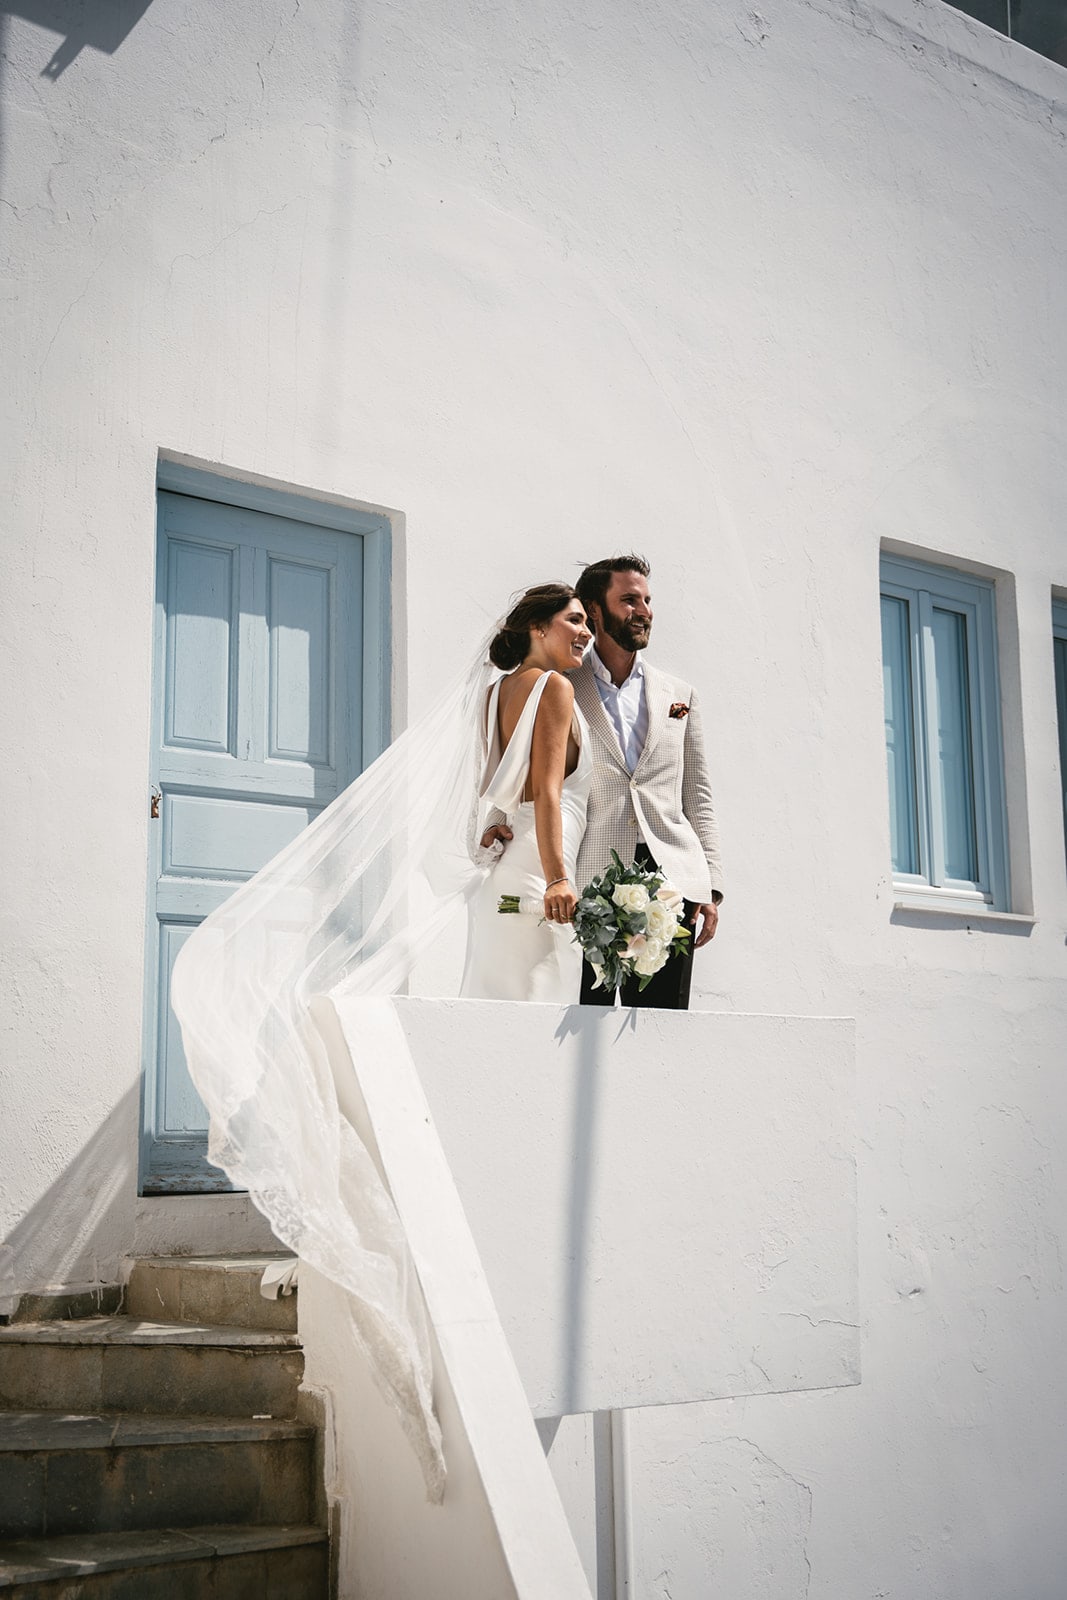 Wandering Fira’s paths, each turn a new chapter in their elopement journey